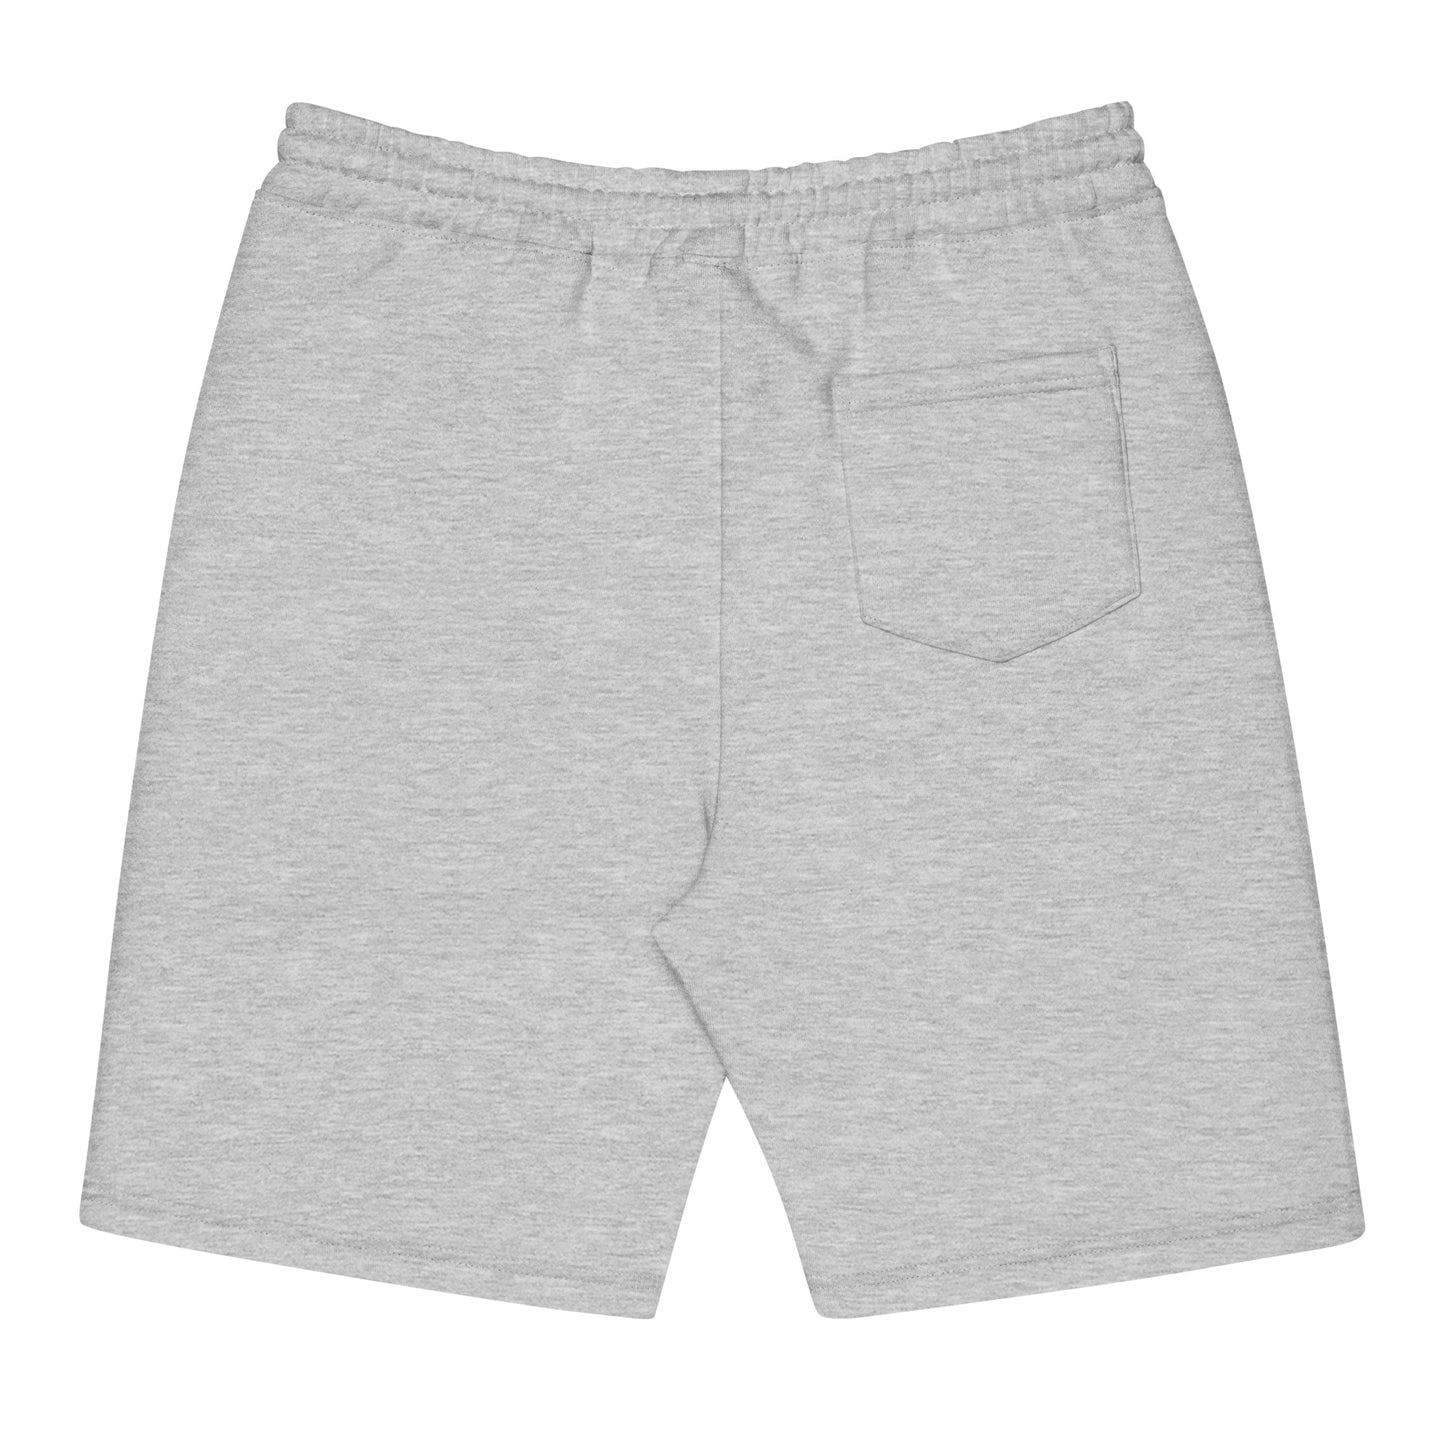 Load image into Gallery viewer, Team VPA Unisex fleece shorts - Embroidered
